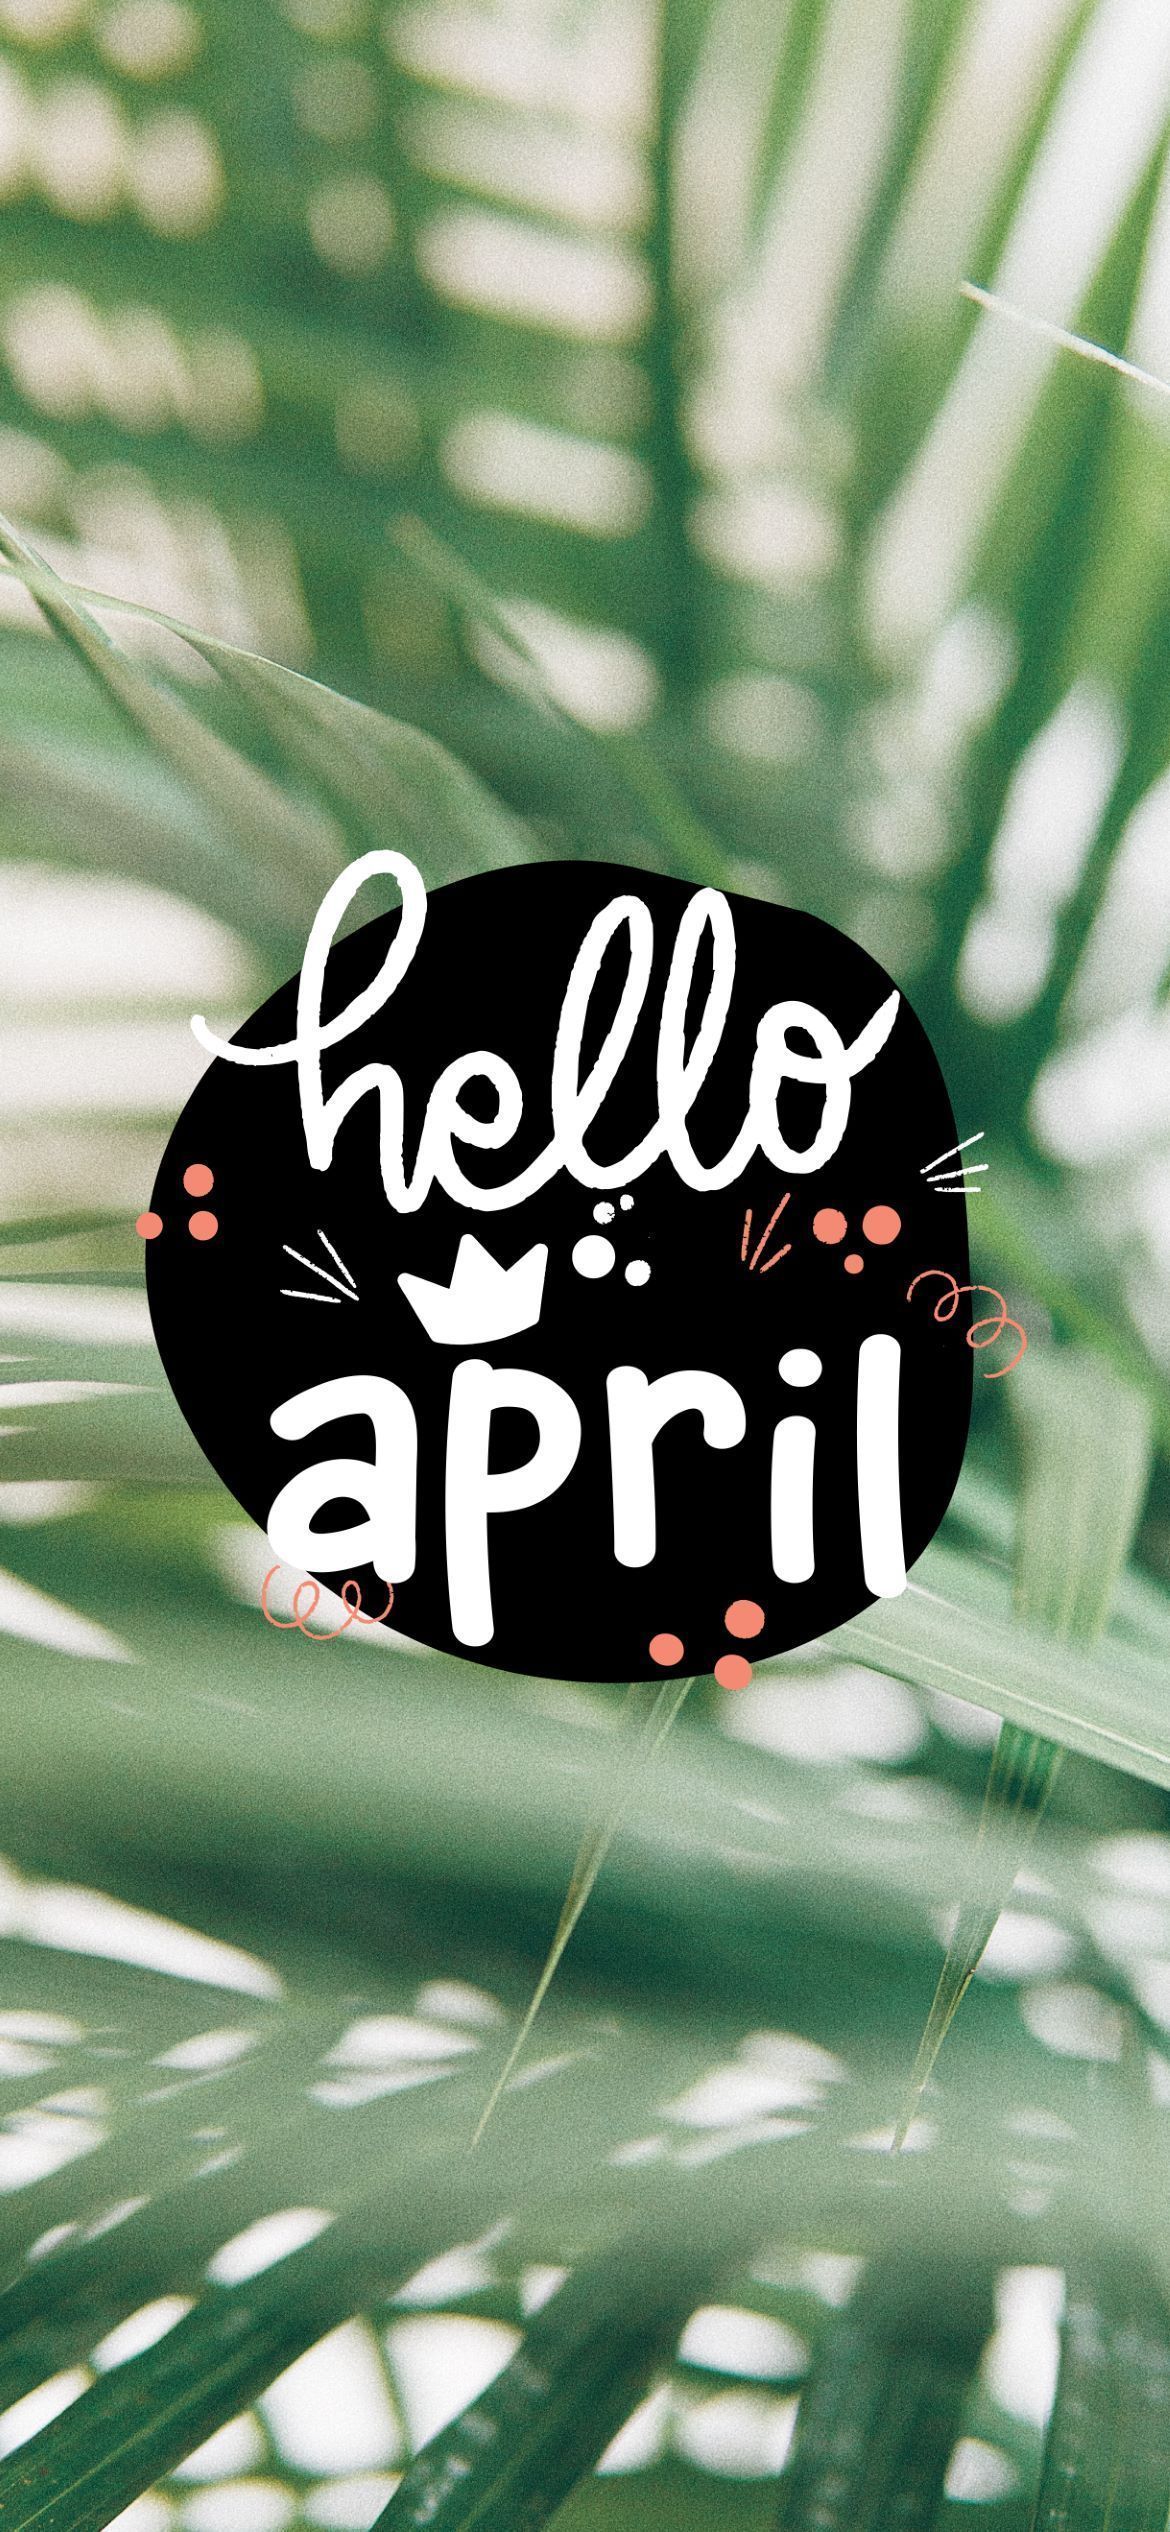 Hello April wallpaper for iPhone. Download this wallpaper for your iPhone X, iPhone XS, iPhone XR, iPhone 11, iPhone 11 Pro, iPhone 11 Pro Max, iPhone SE, iPhone 8, iPhone 8 Plus, iPhone 7, iPhone 7 Plus, iPhone 6, iPhone 6 Plus, iPhone SE, and other iPhone models. - April